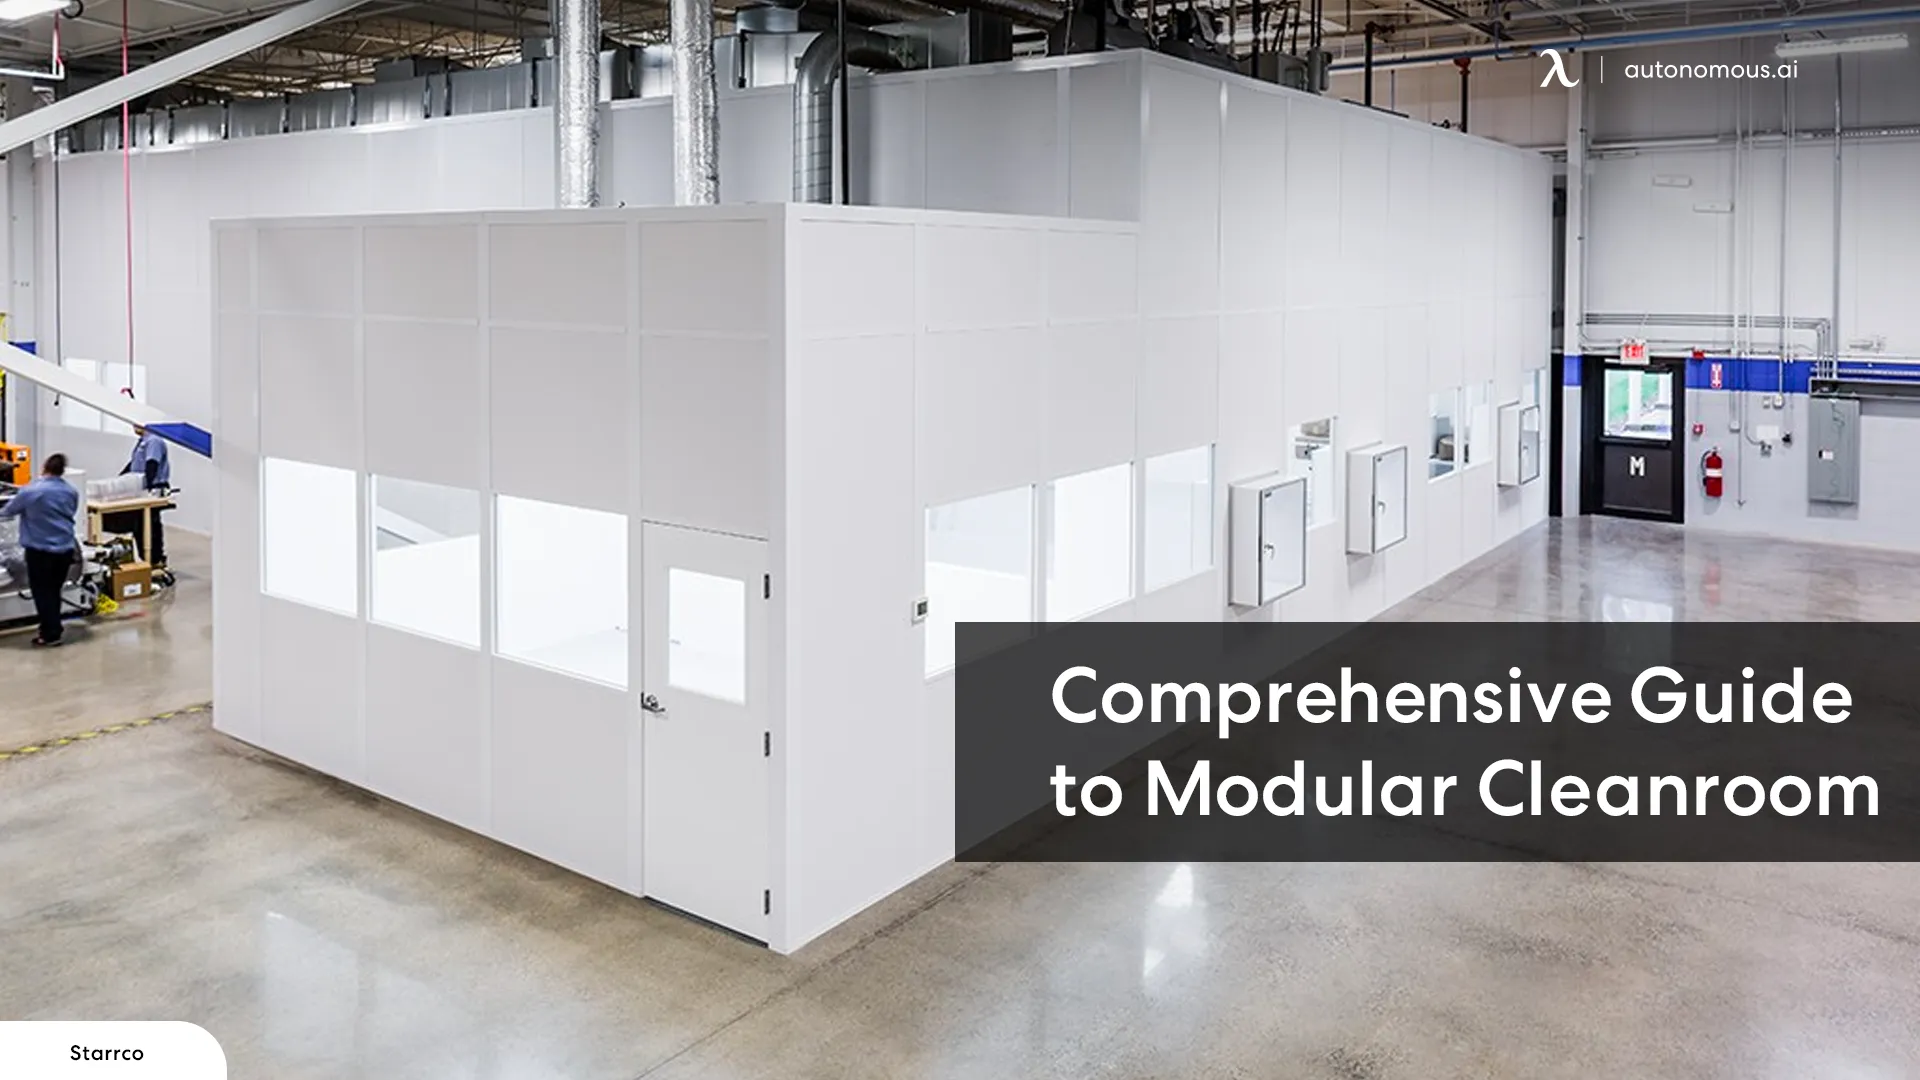 A Comprehensive Guide to Modular Cleanroom: All You Need to Know